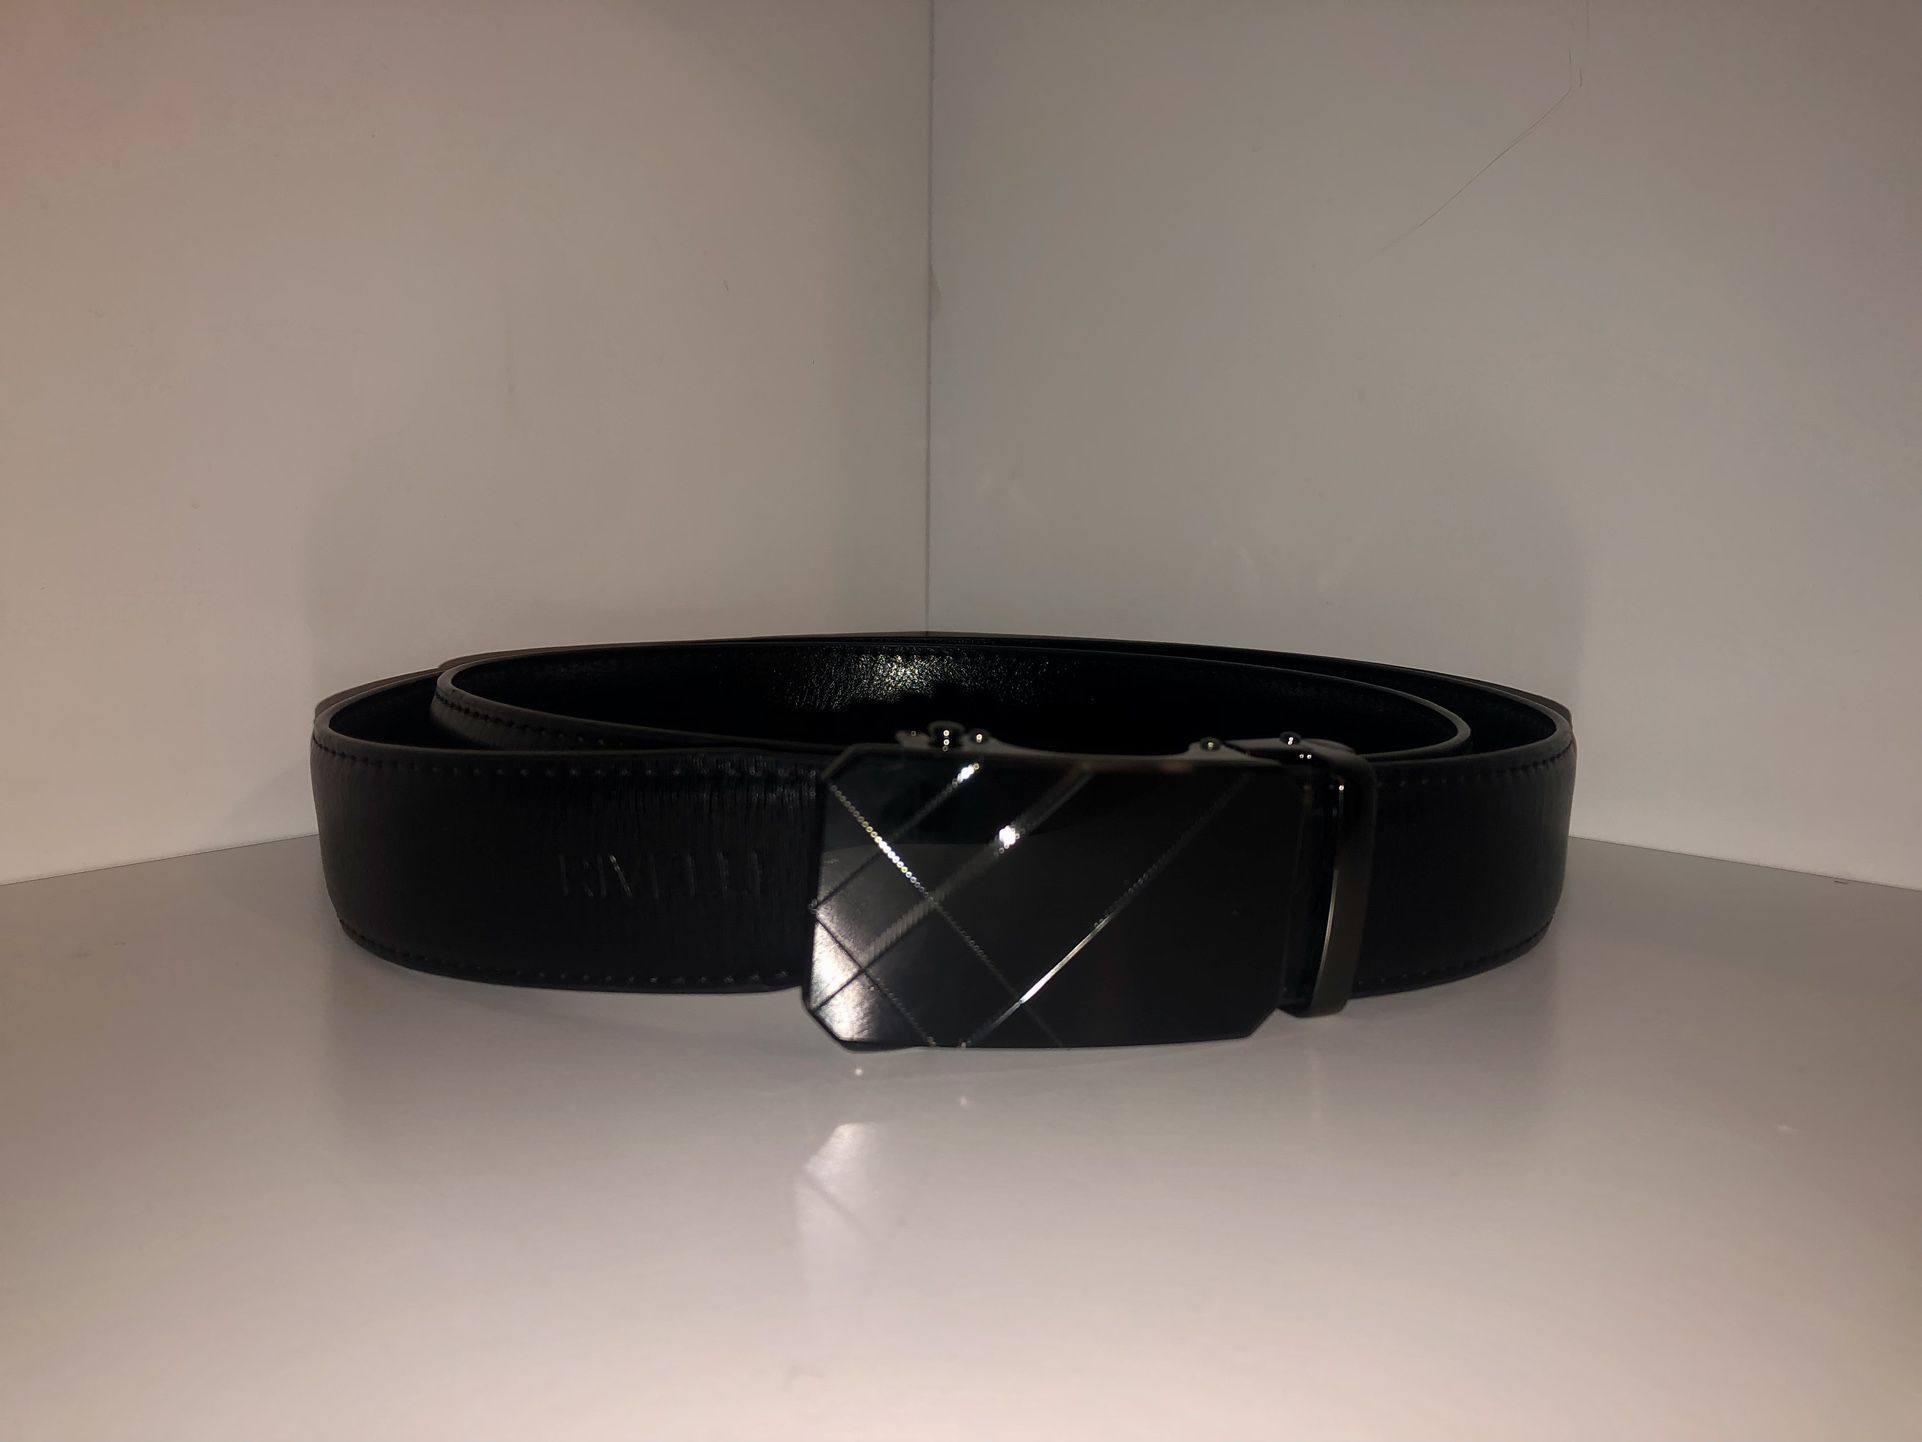 Men's Fashion Dress Belt for Sale in The Bronx, NY - OfferUp